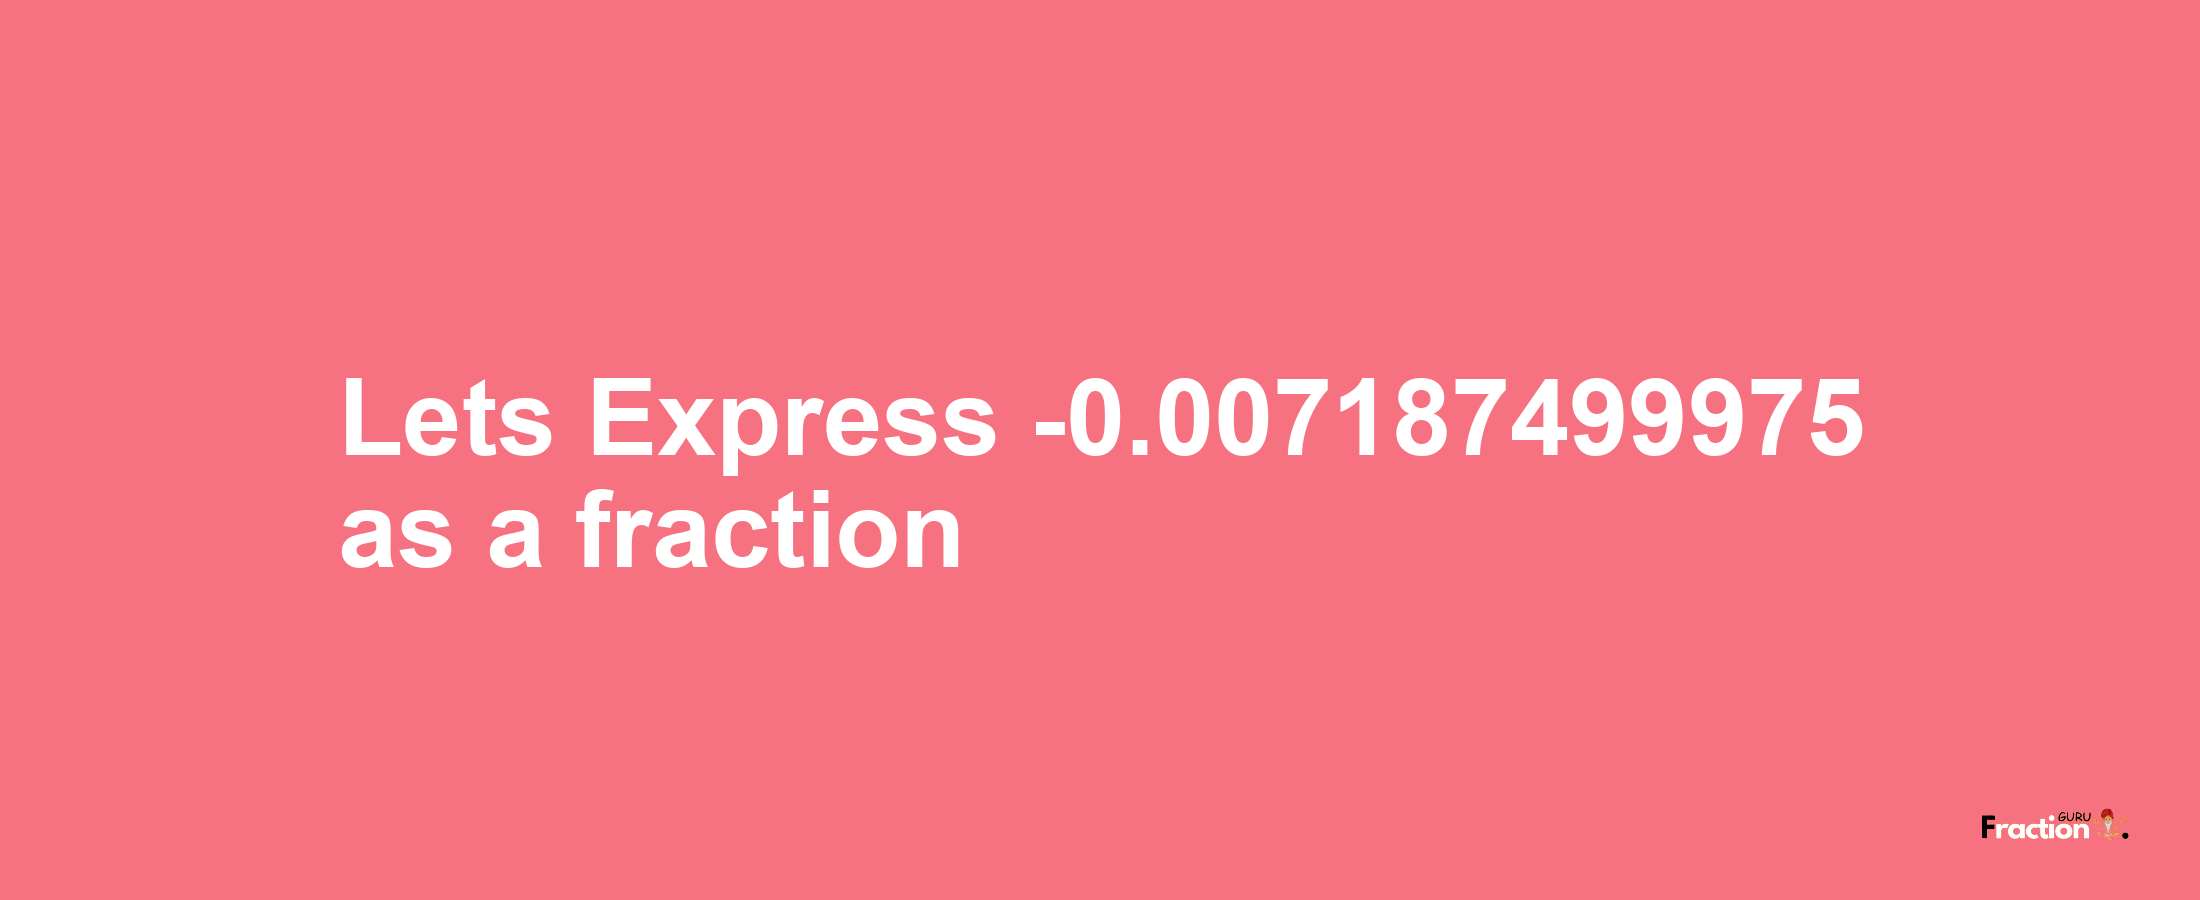 Lets Express -0.007187499975 as afraction